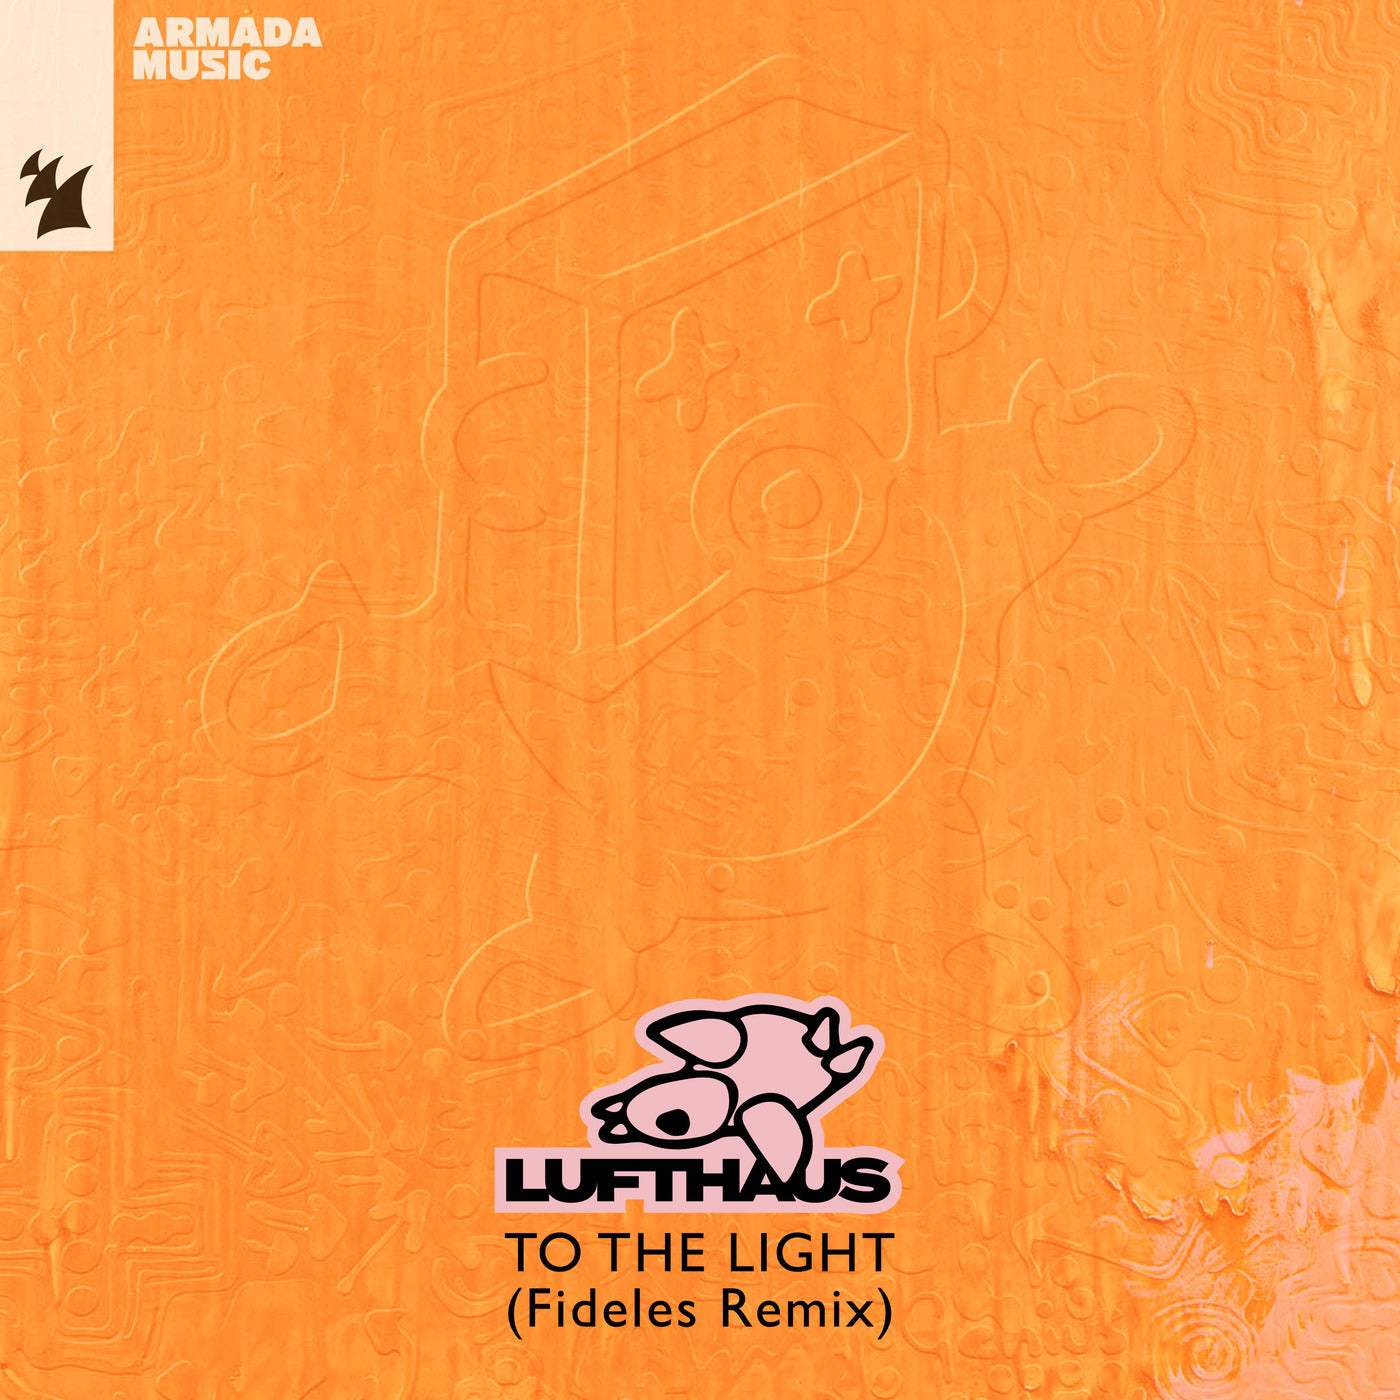 image cover: Lufthaus - To The Light - Fideles Remix / ARMAS2246R1